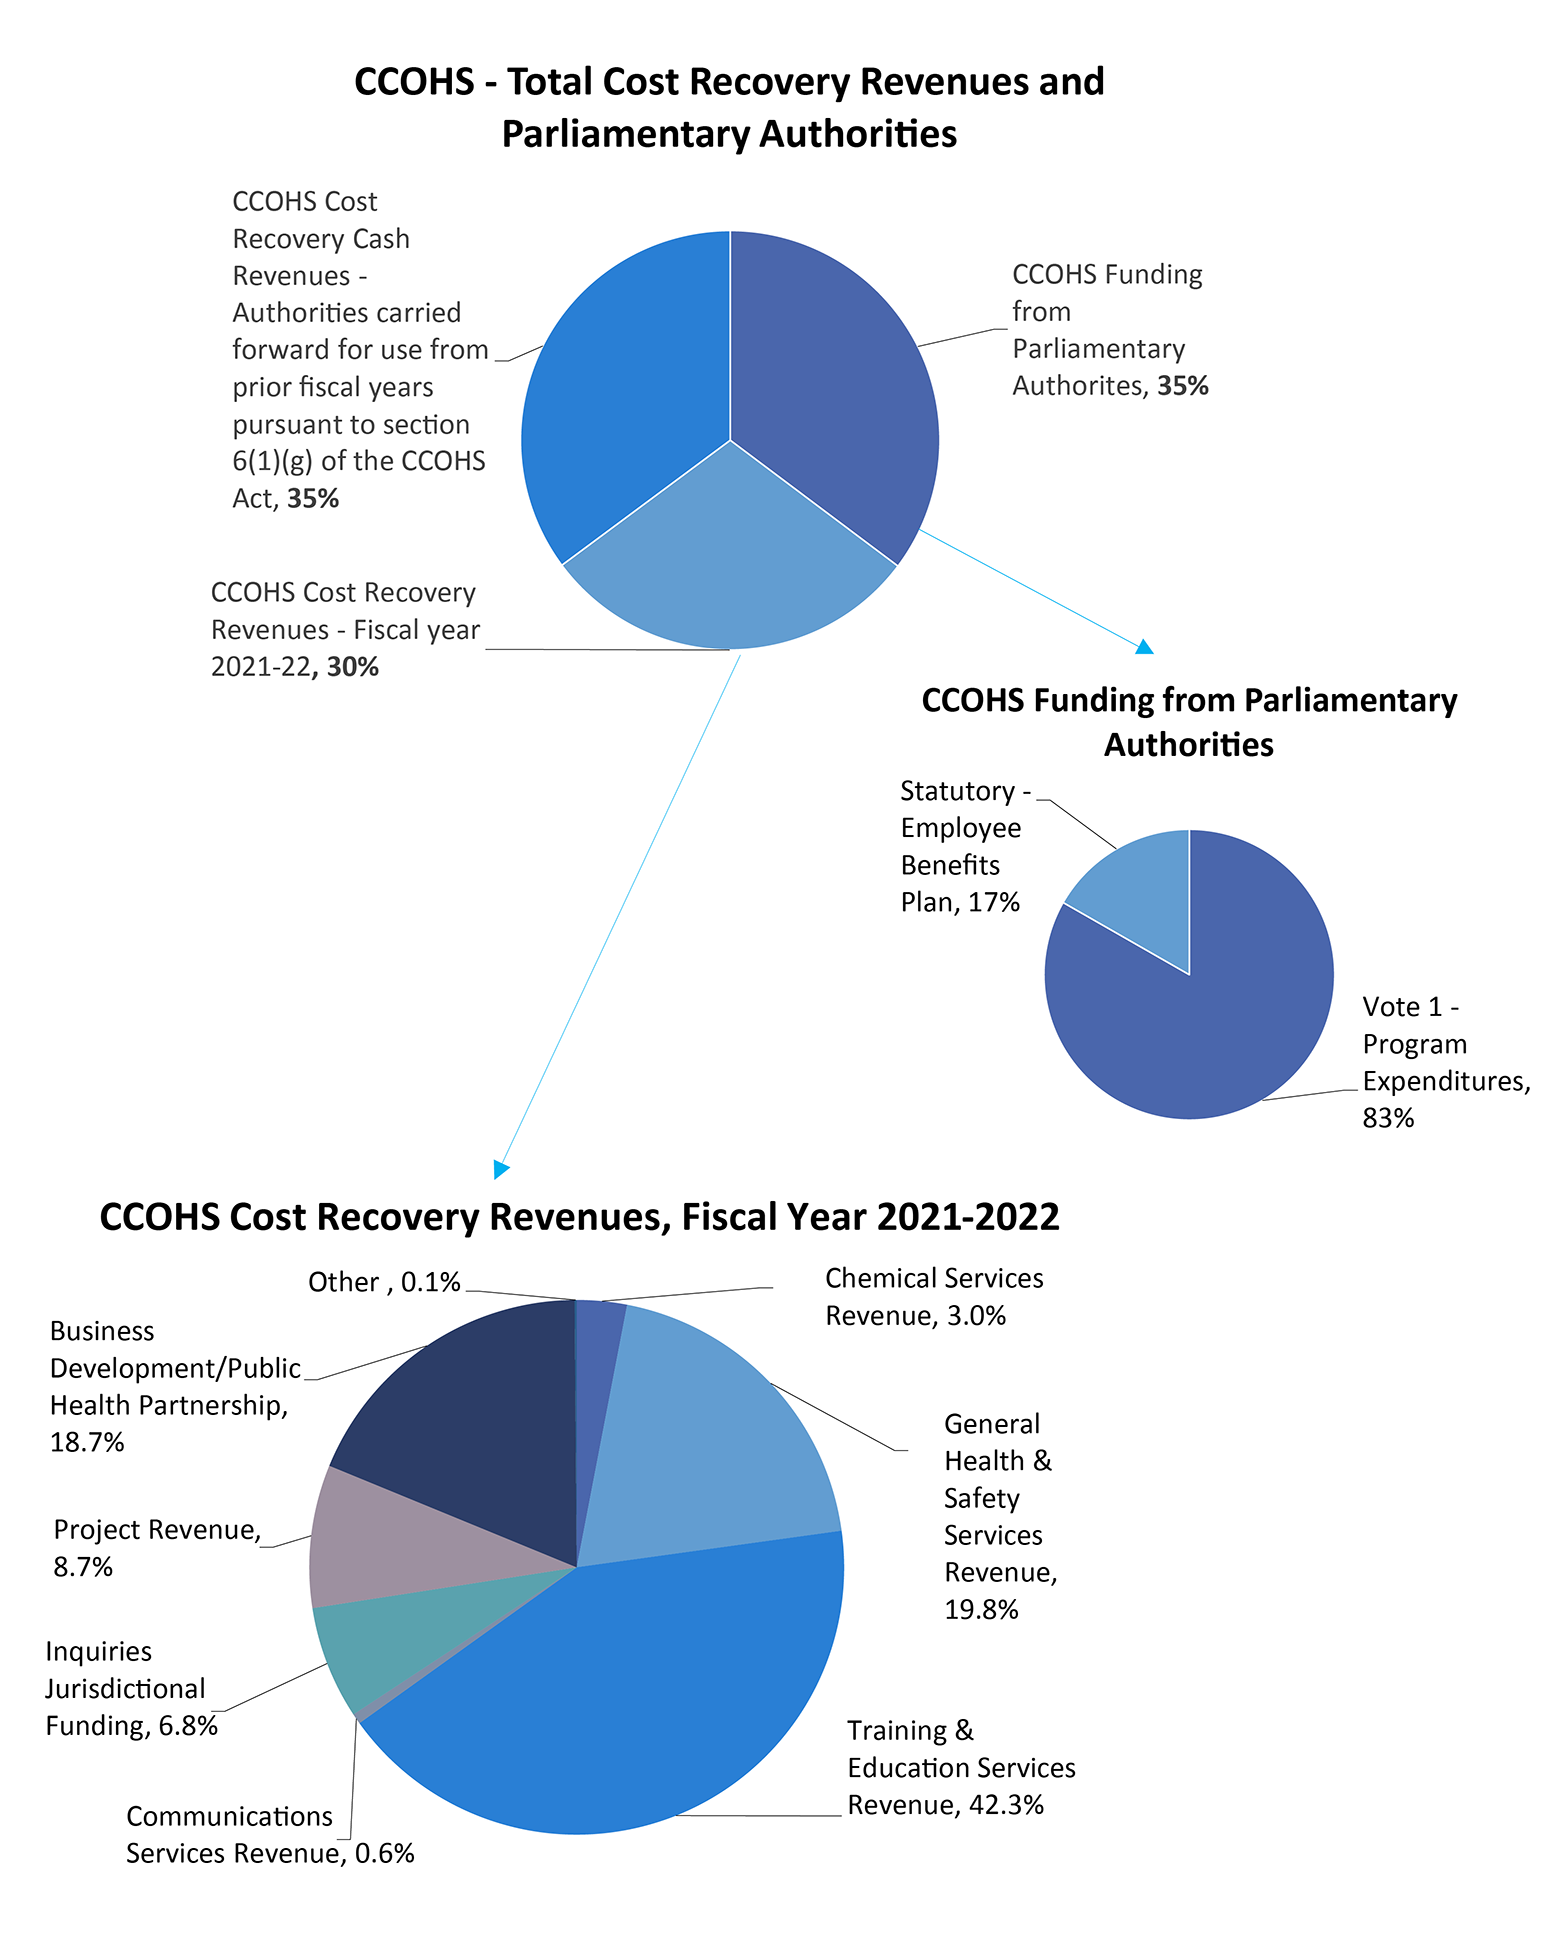 Graphs: CCOHS - Total Cost Recovery Revenues and Parliamentary Authorities, CCOHS Funding from Parliamentary Authorities, CCOHS Cost Recovery Revenues, Fiscal Year 2021-22